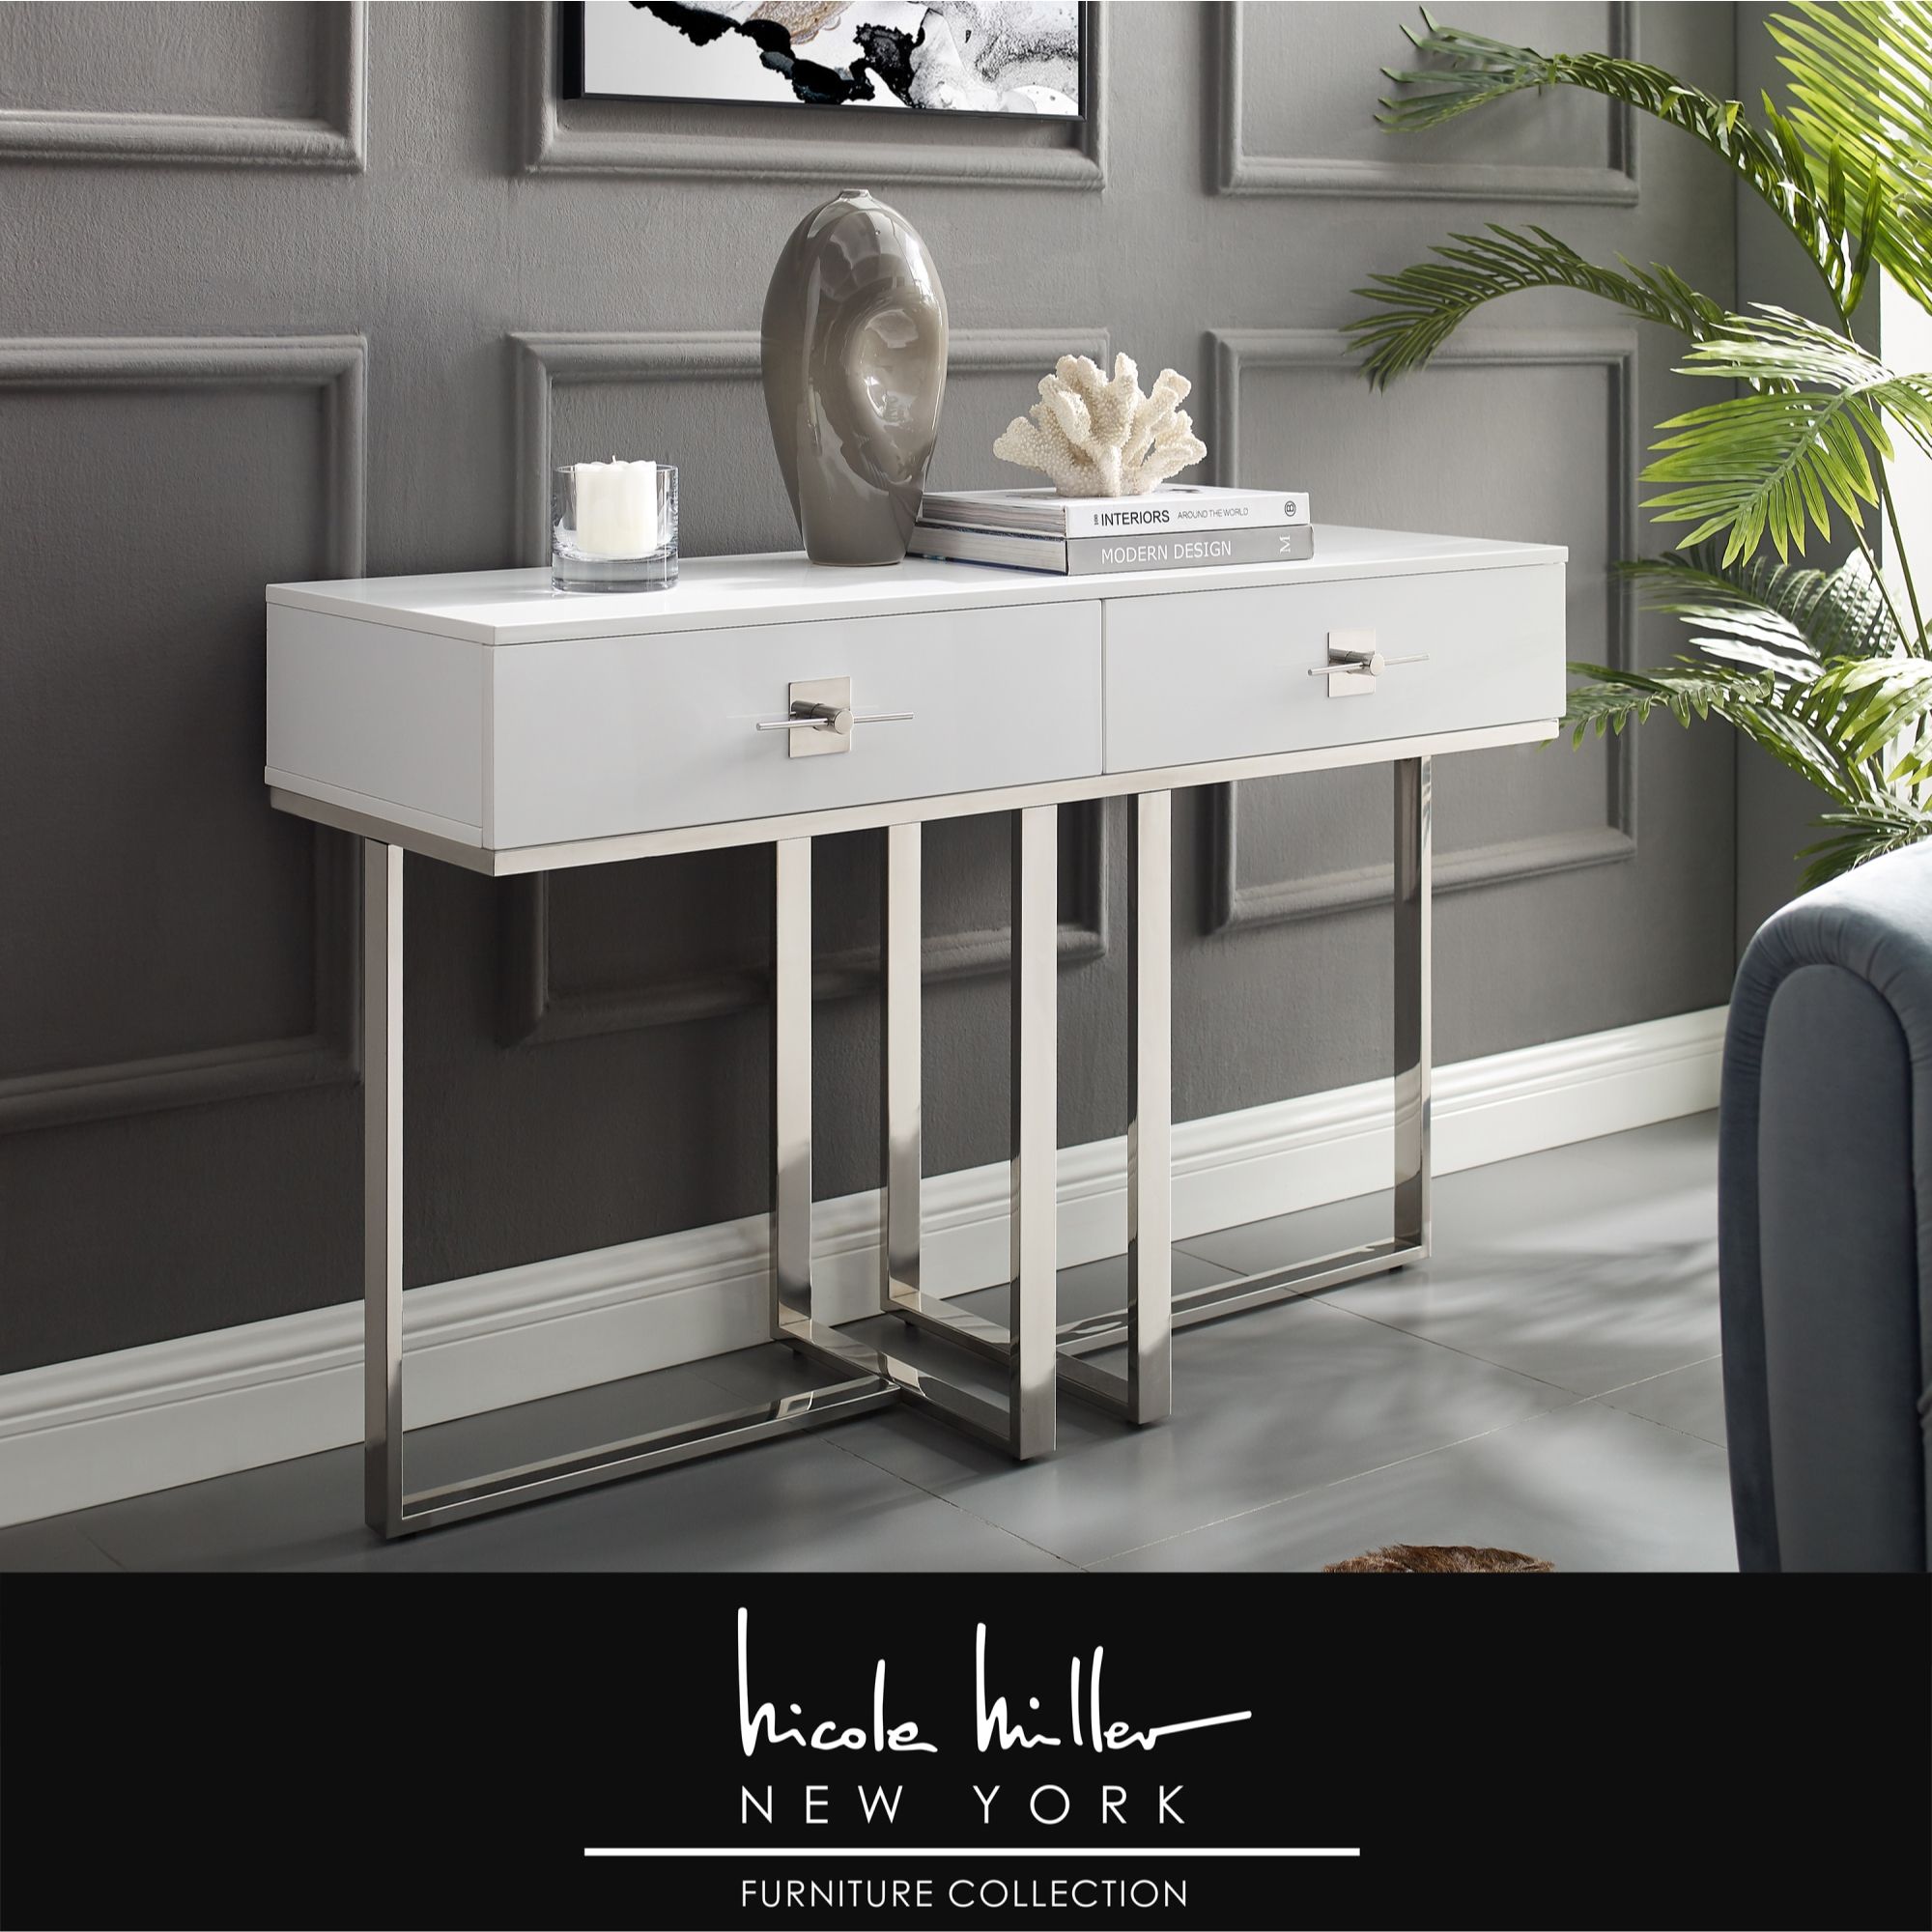 Nicole Miller Meli Console Table 2 Drawers Hight Gloss Inside Chrome Console Tables (View 3 of 20)